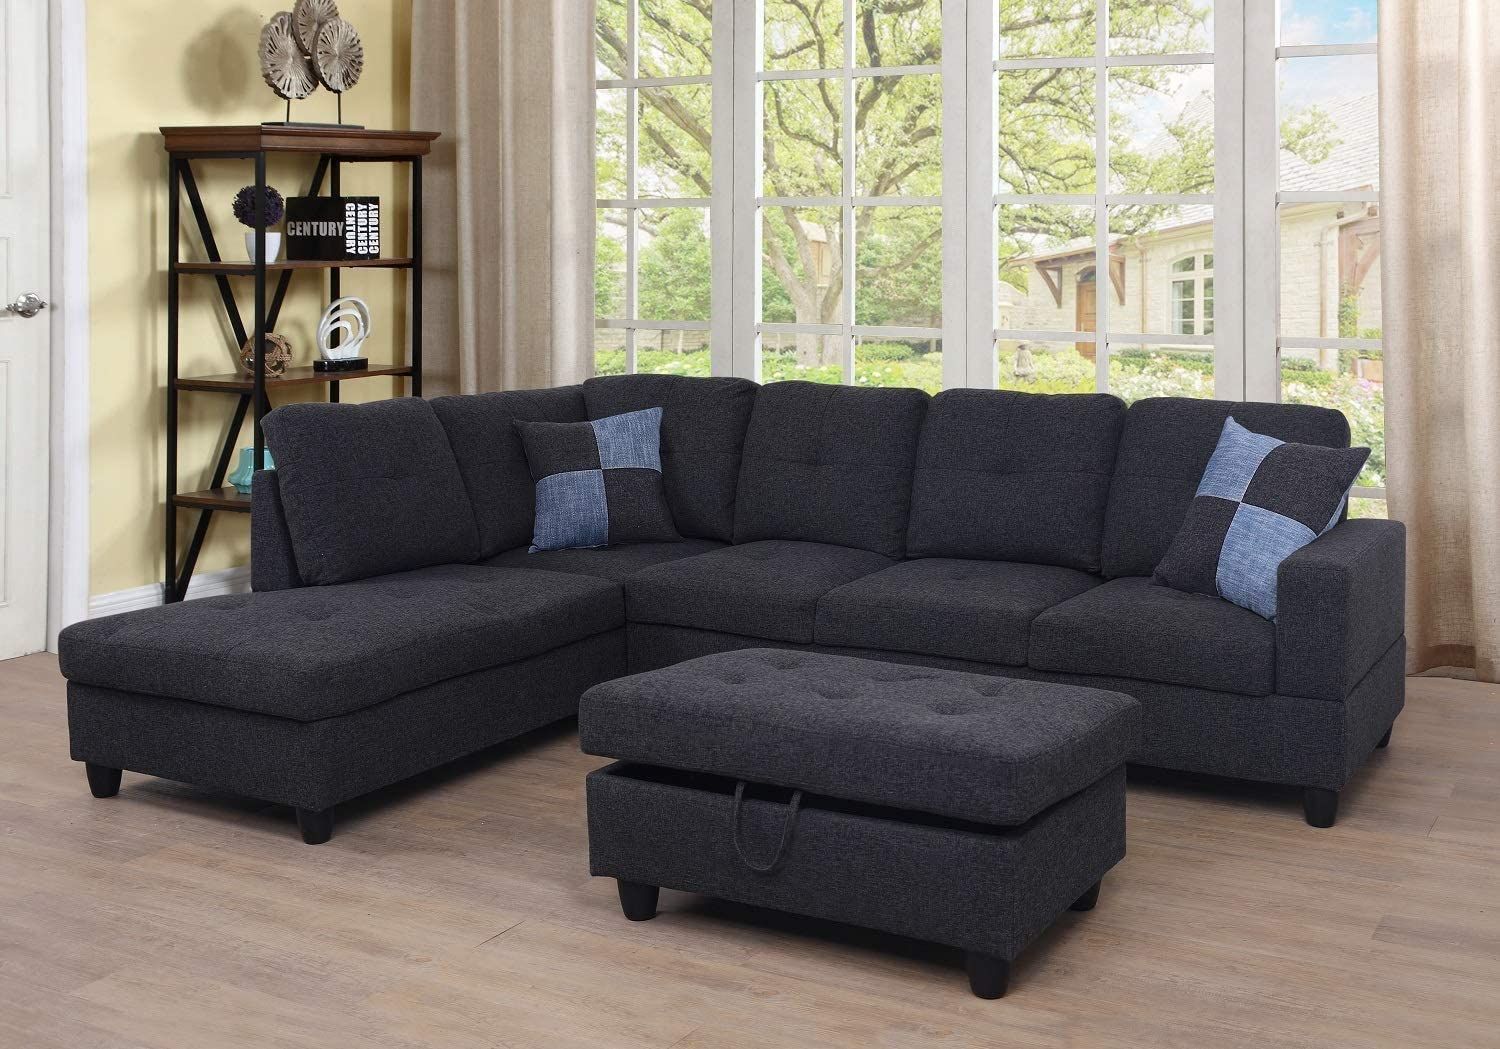 Ponliving Furniture 3 Pcpiece Sectional Sofa Couch Set, L With Hannah Right Sectional Sofas (View 1 of 15)